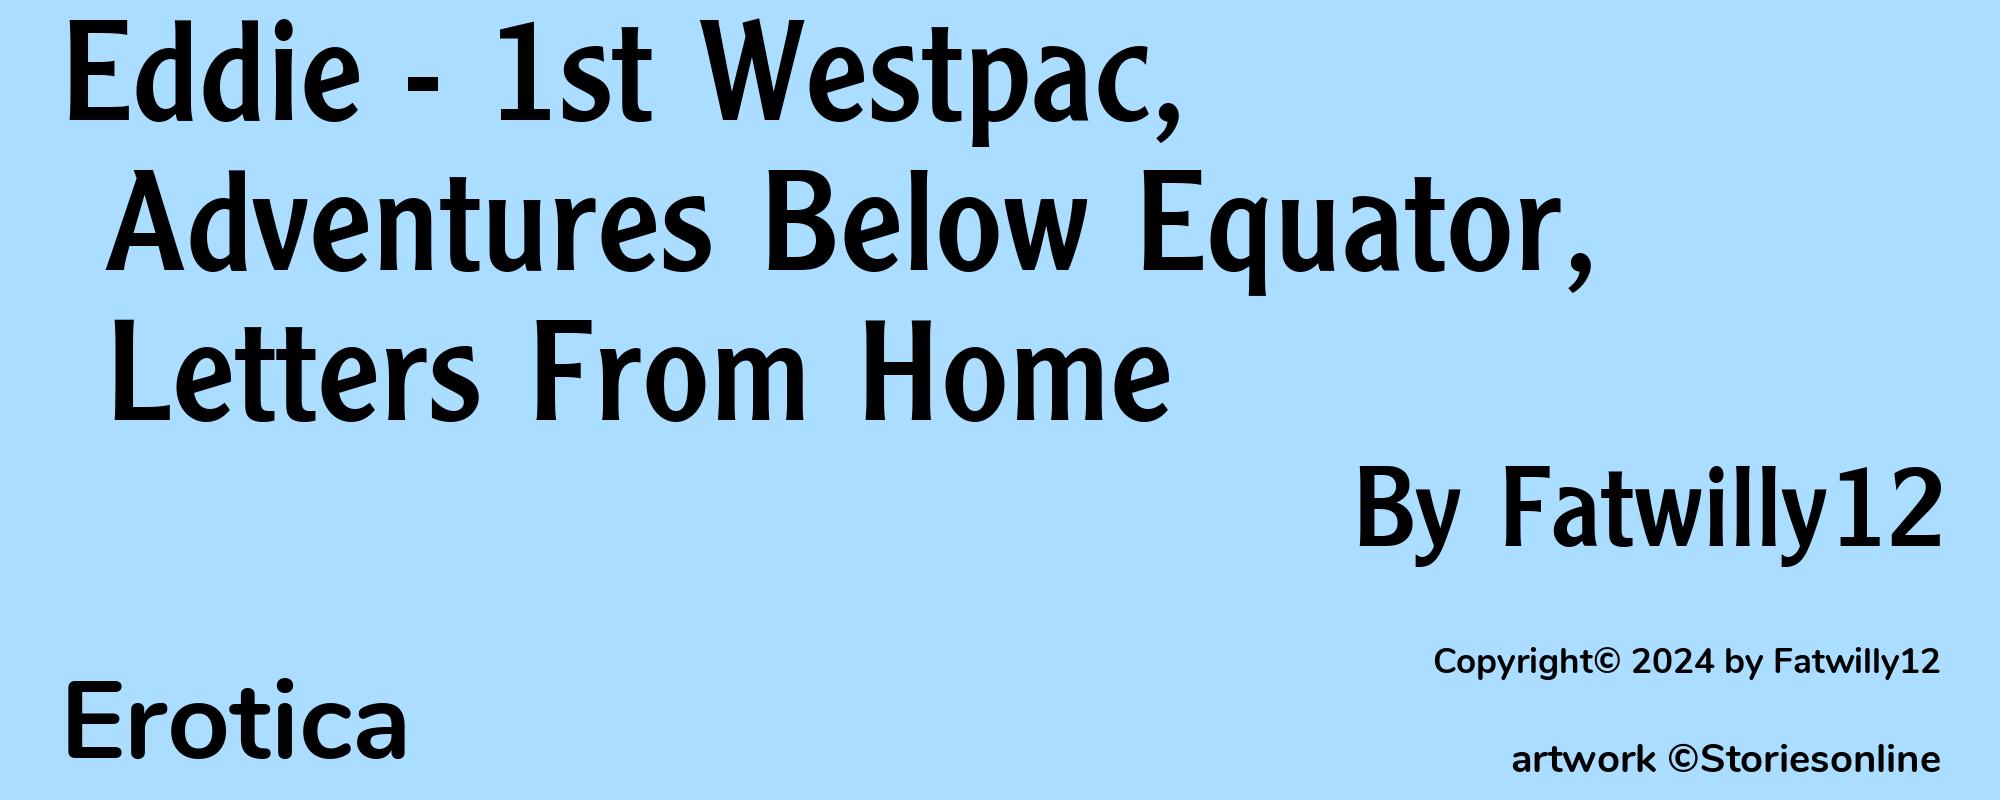 Eddie - 1st Westpac, Adventures Below Equator, Letters From Home - Cover